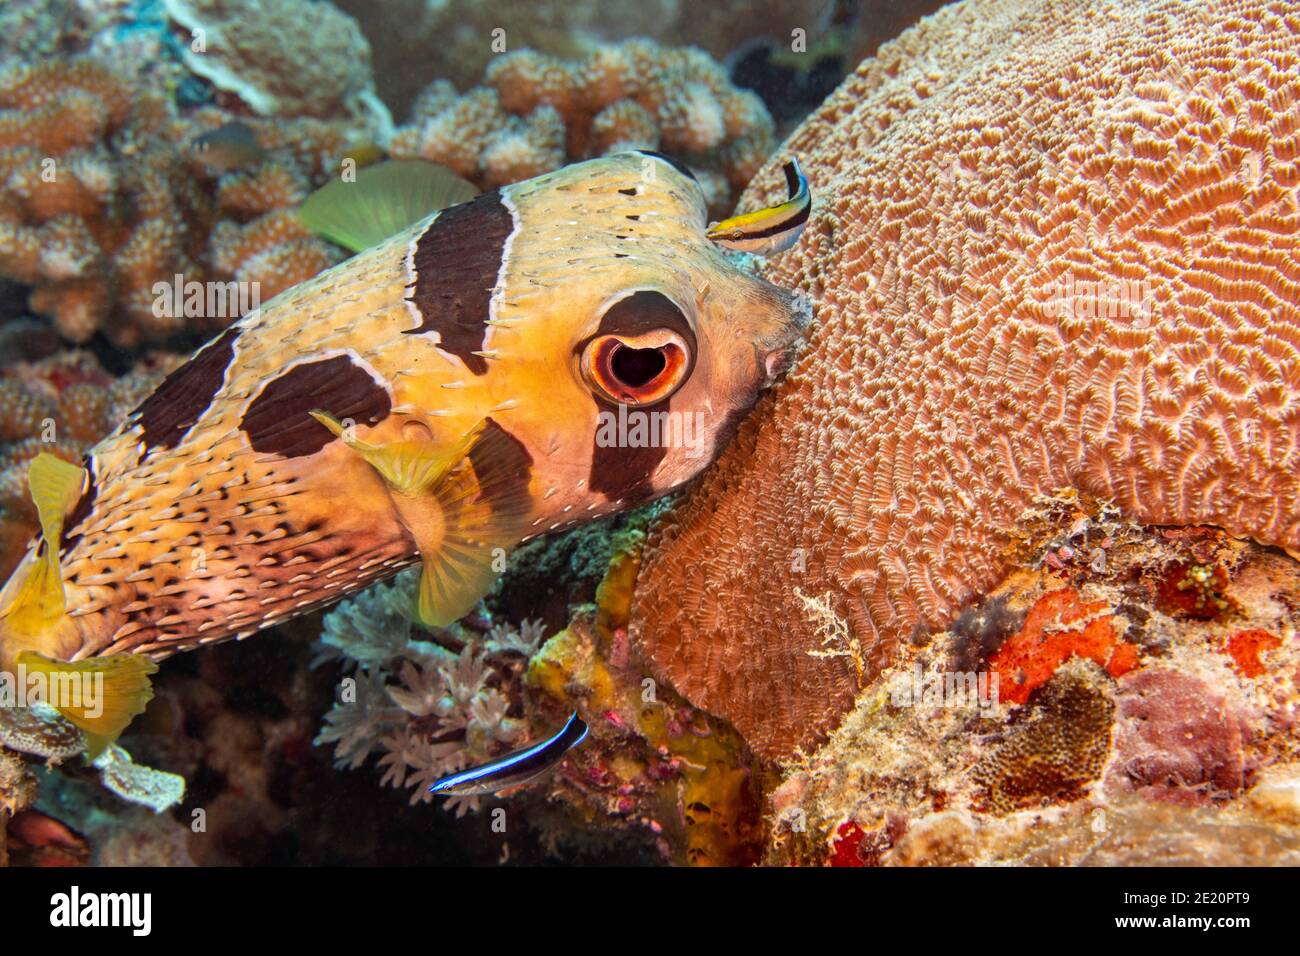 A juvenile and adult bluestreak cleaner wrasse, Labroides dimidiatus, inspect a black-blotched porcupinefish, Diodon liturosus, off the island of Yap, Stock Photo